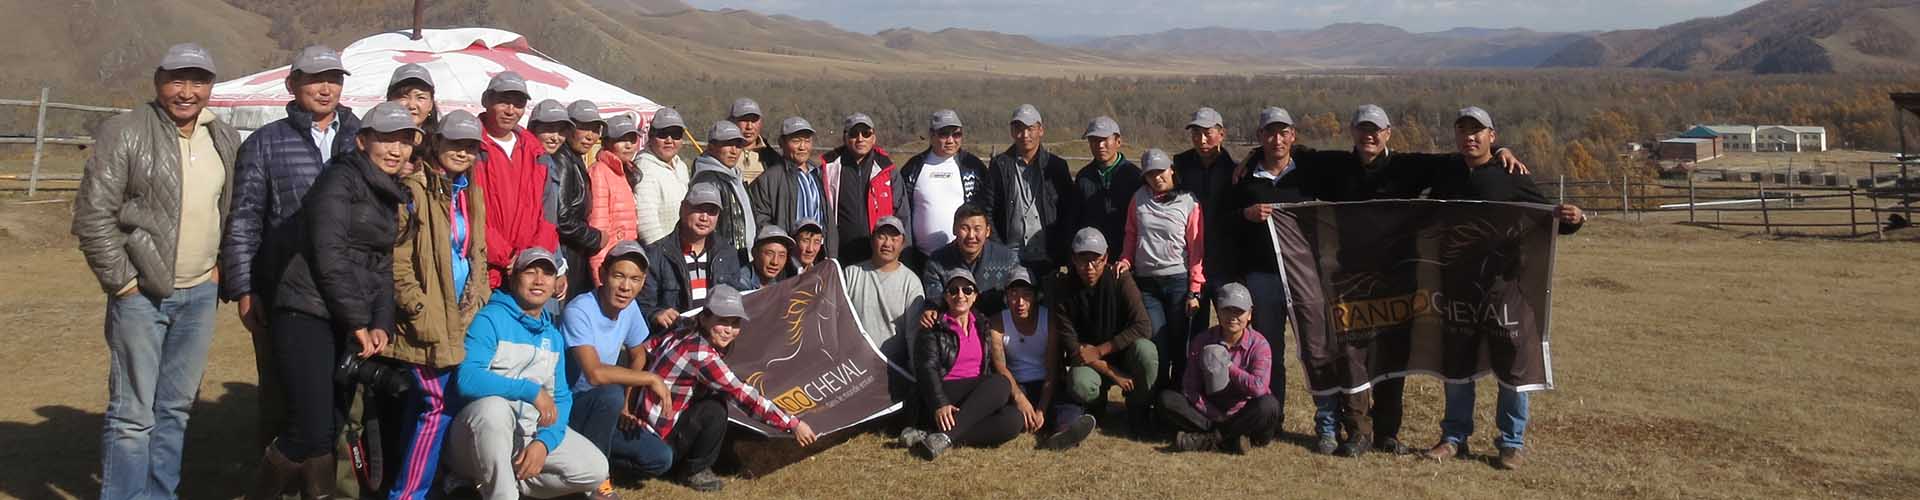 Absolu Voyages Mongolie